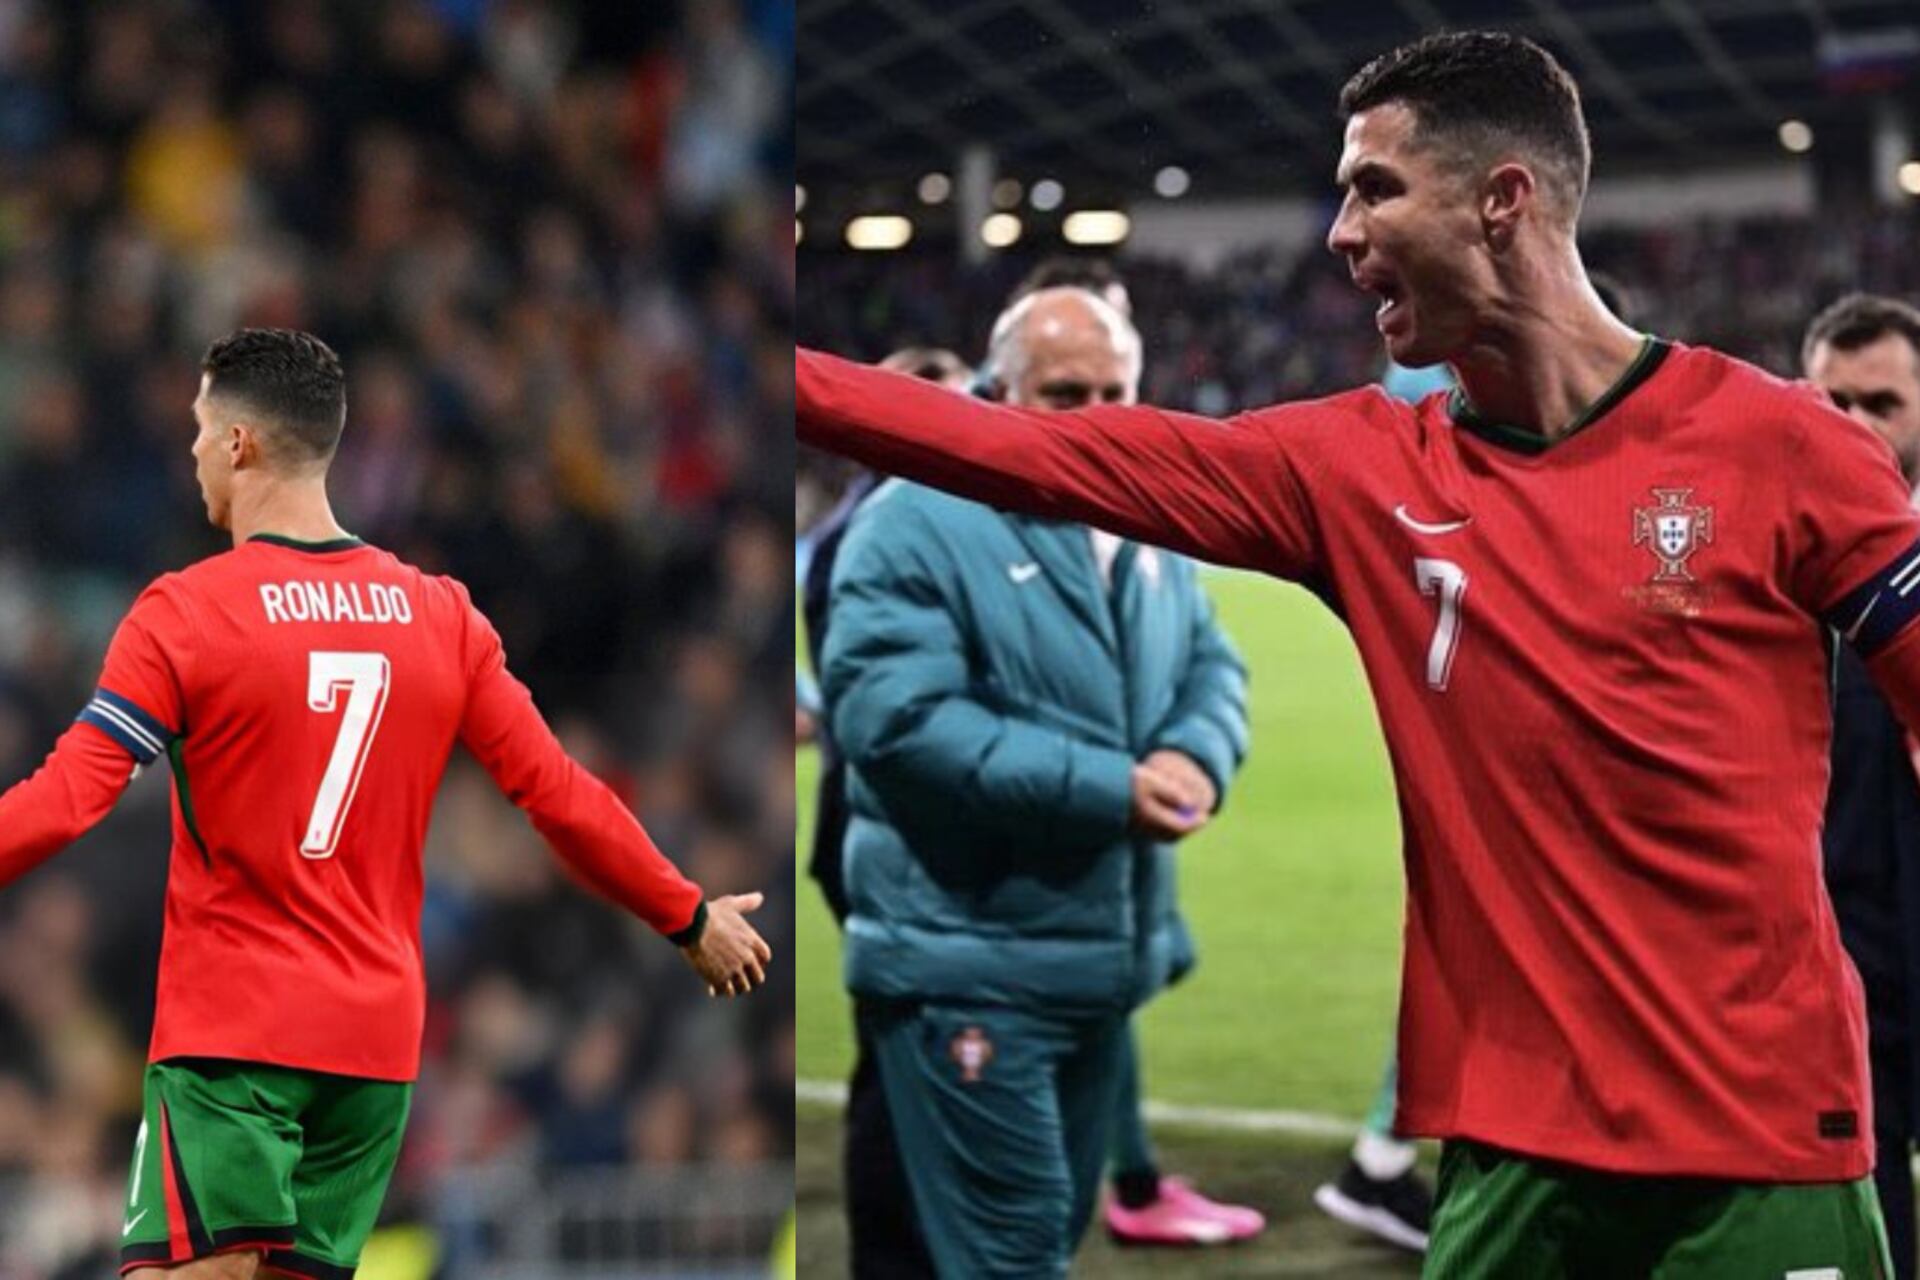 (VIDEO) Cristiano Ronaldo's furious reaction at the referee after Portugal loss